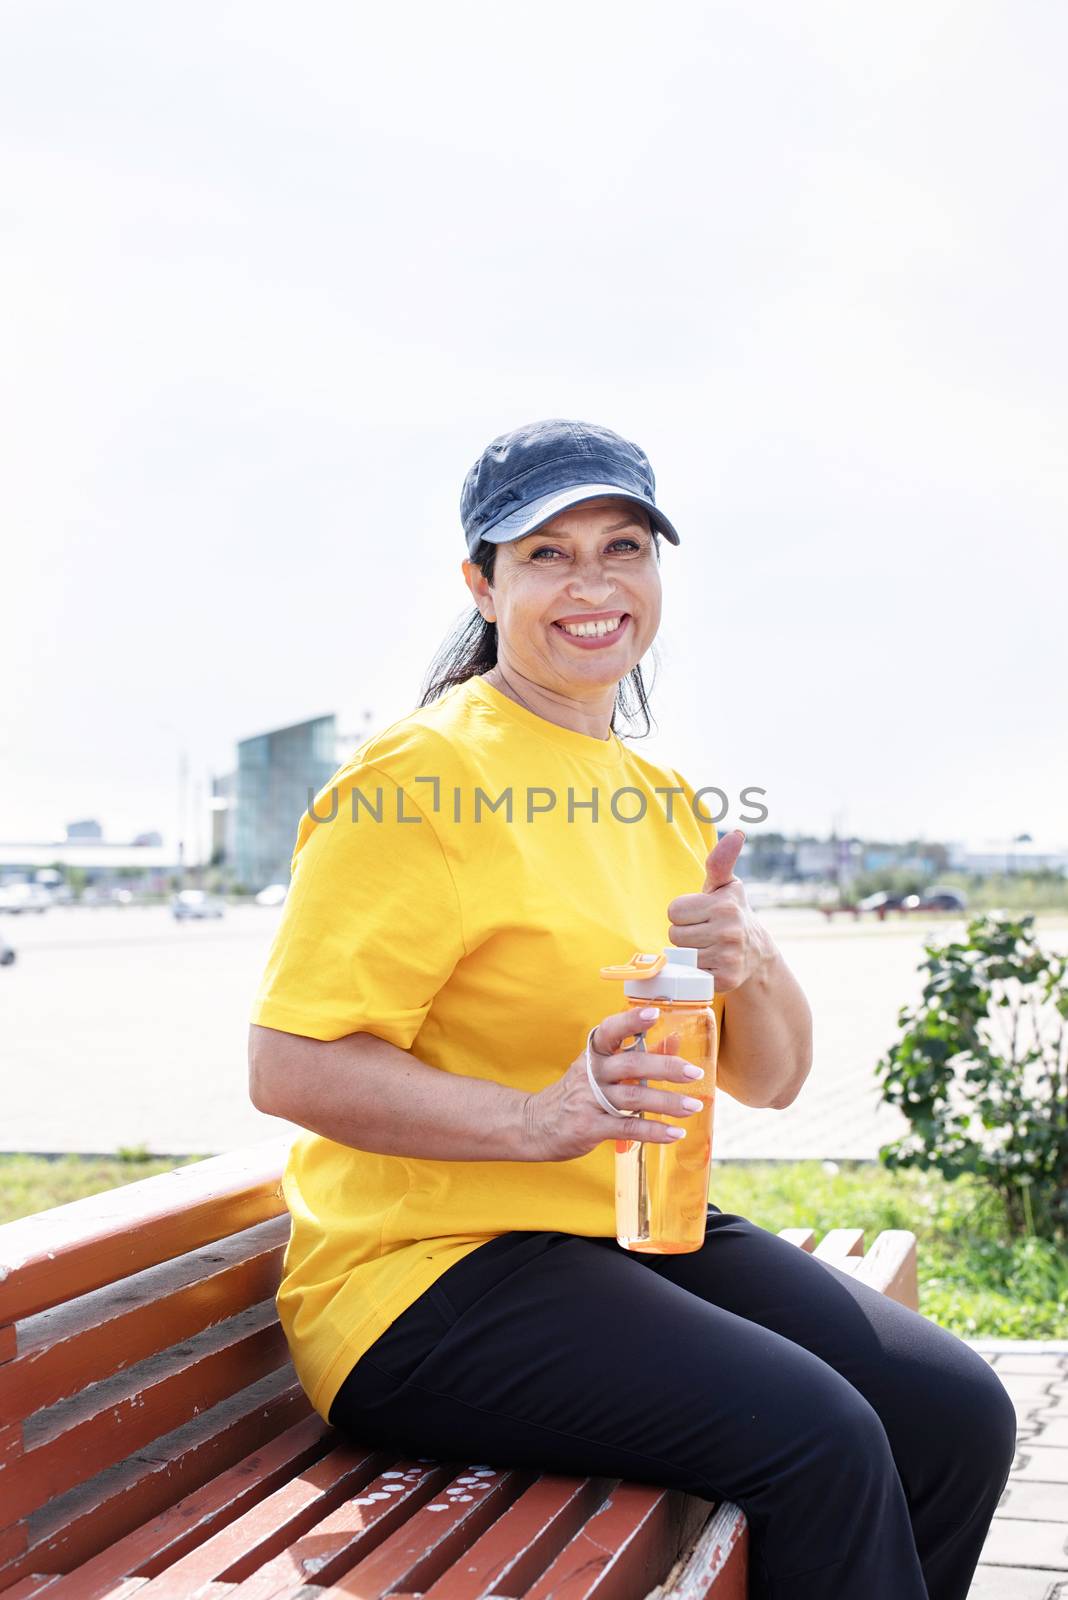 Sport and fitness. Senior sport. Active seniors. Smiling senior woman drinking water after workout outdoors on the sports ground showing thumbs up